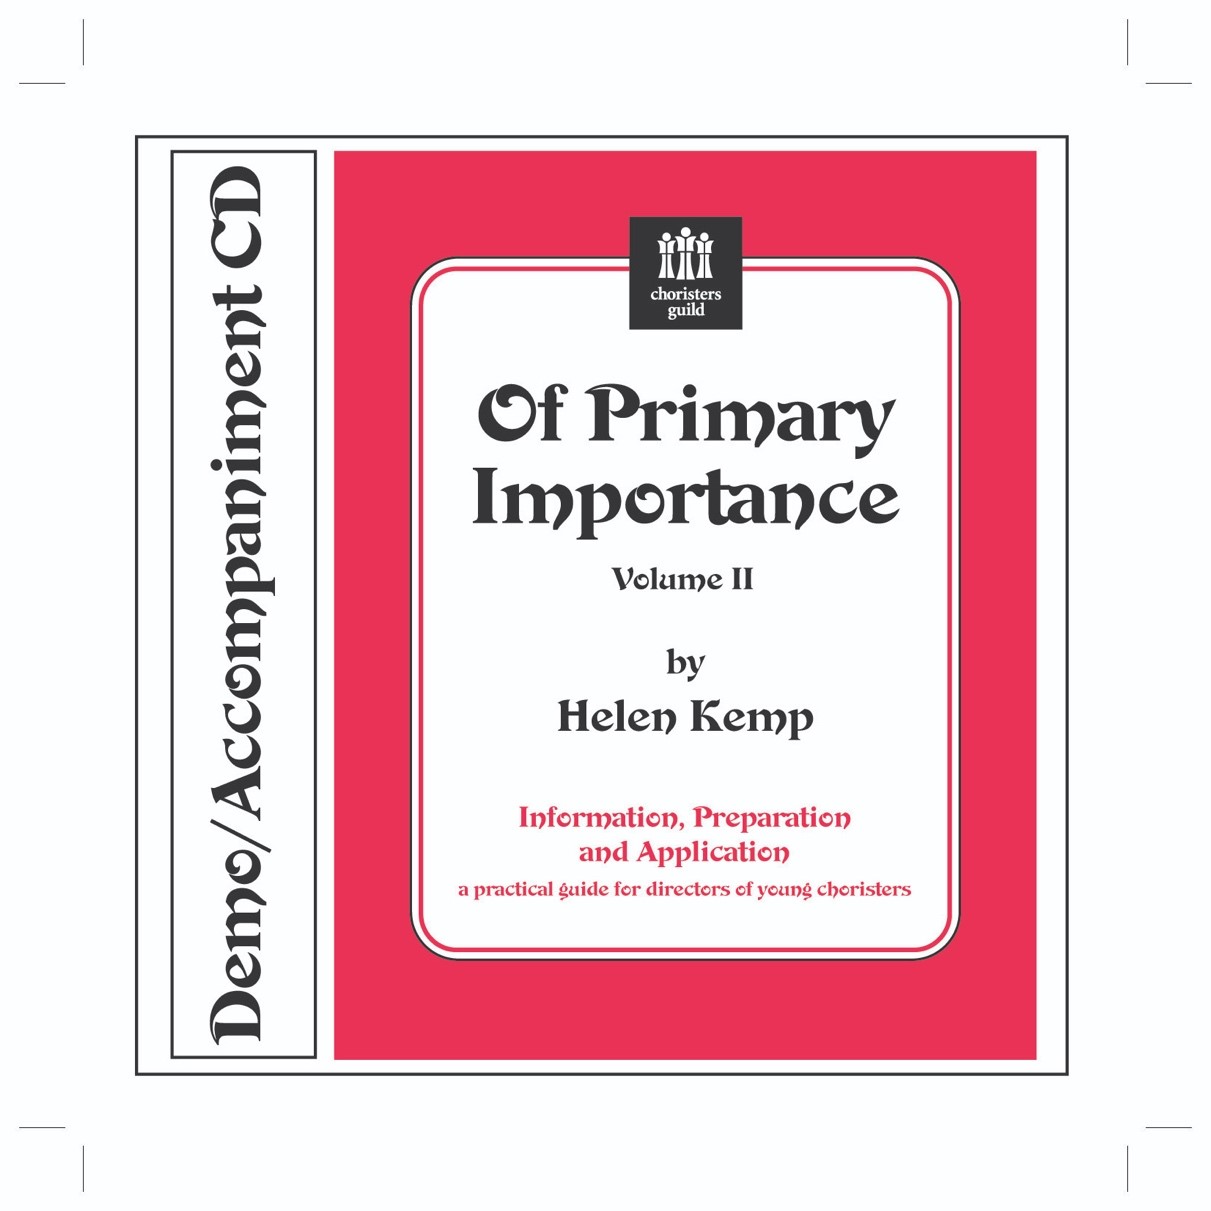 Of Primary Importance, Volume II CD